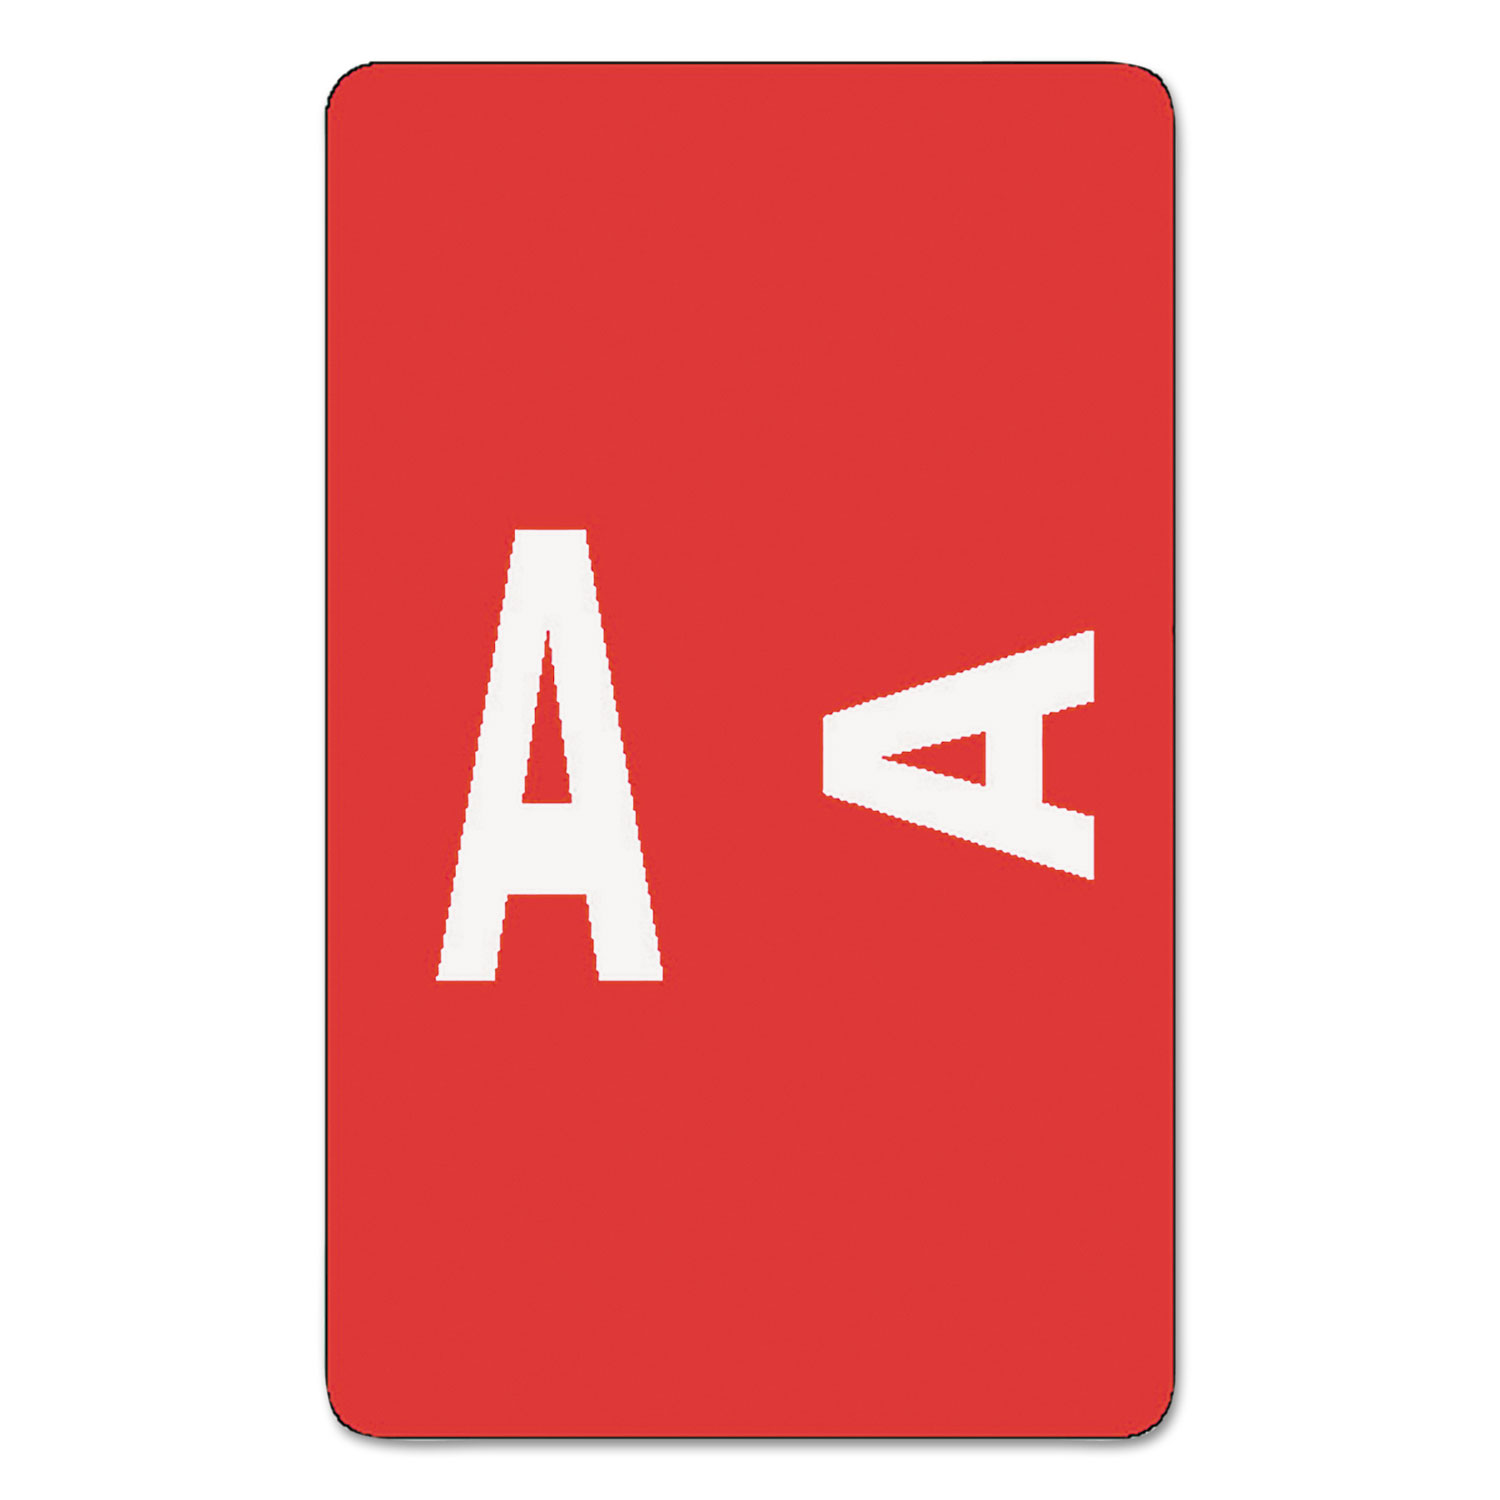  Smead 67171 AlphaZ Color-Coded Second Letter Alphabetical Labels, A, 1 x 1.63, Red, 10/Sheet, 10 Sheets/Pack (SMD67171) 